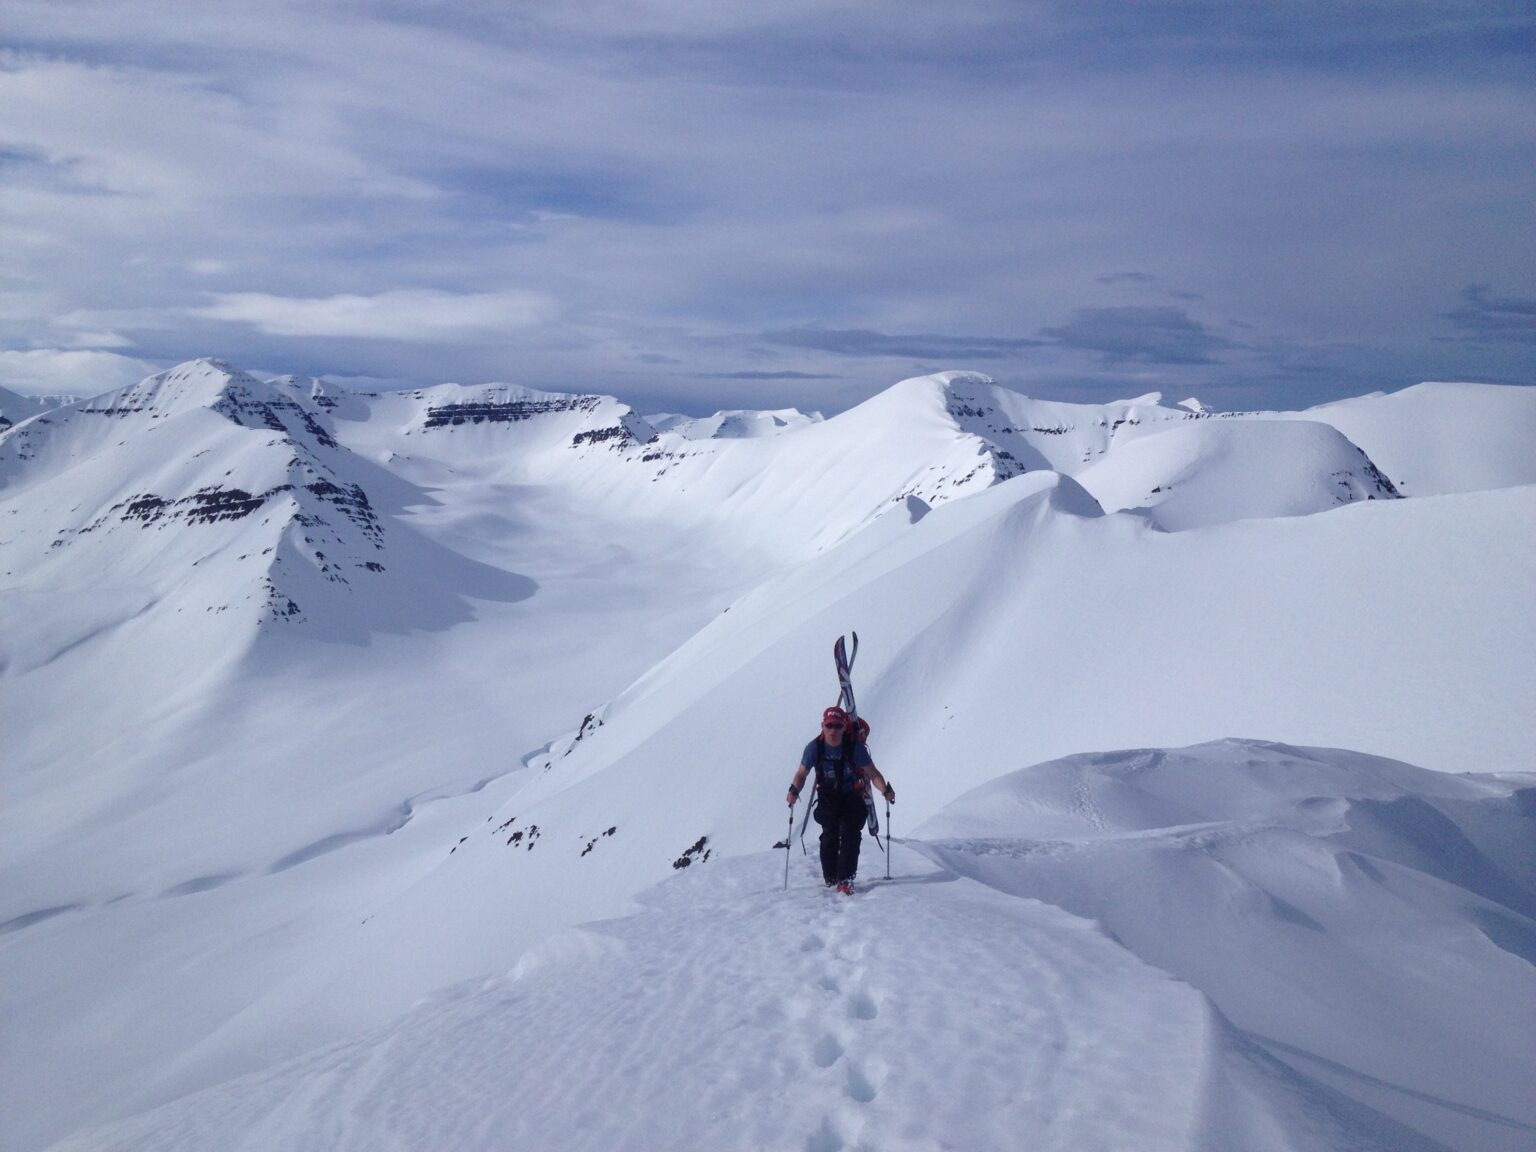 Climbing onto the ridge of Arnfinnsfjall with the northern mountain of Iceland in the distance